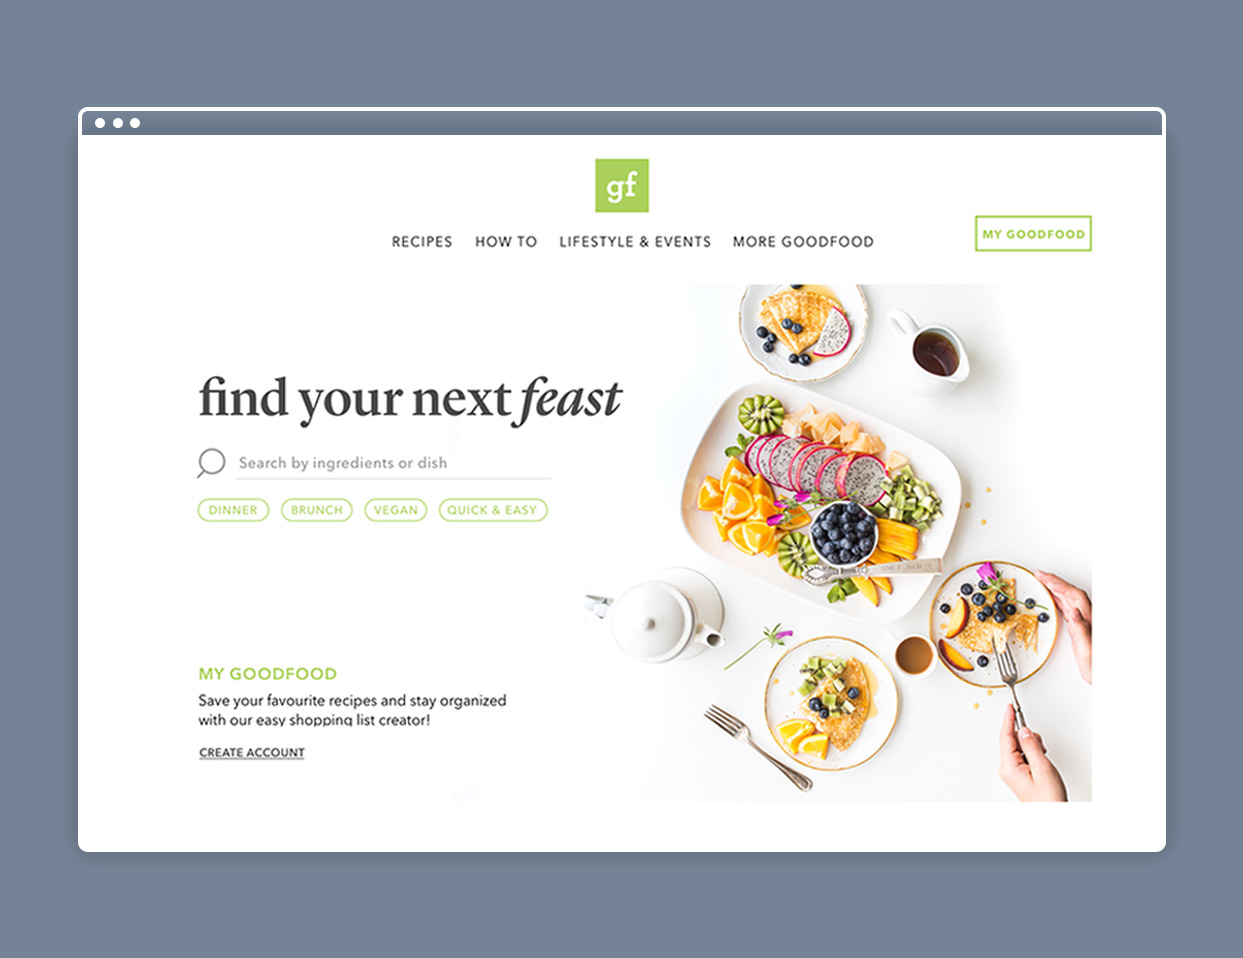 bbc goodfood website redesign